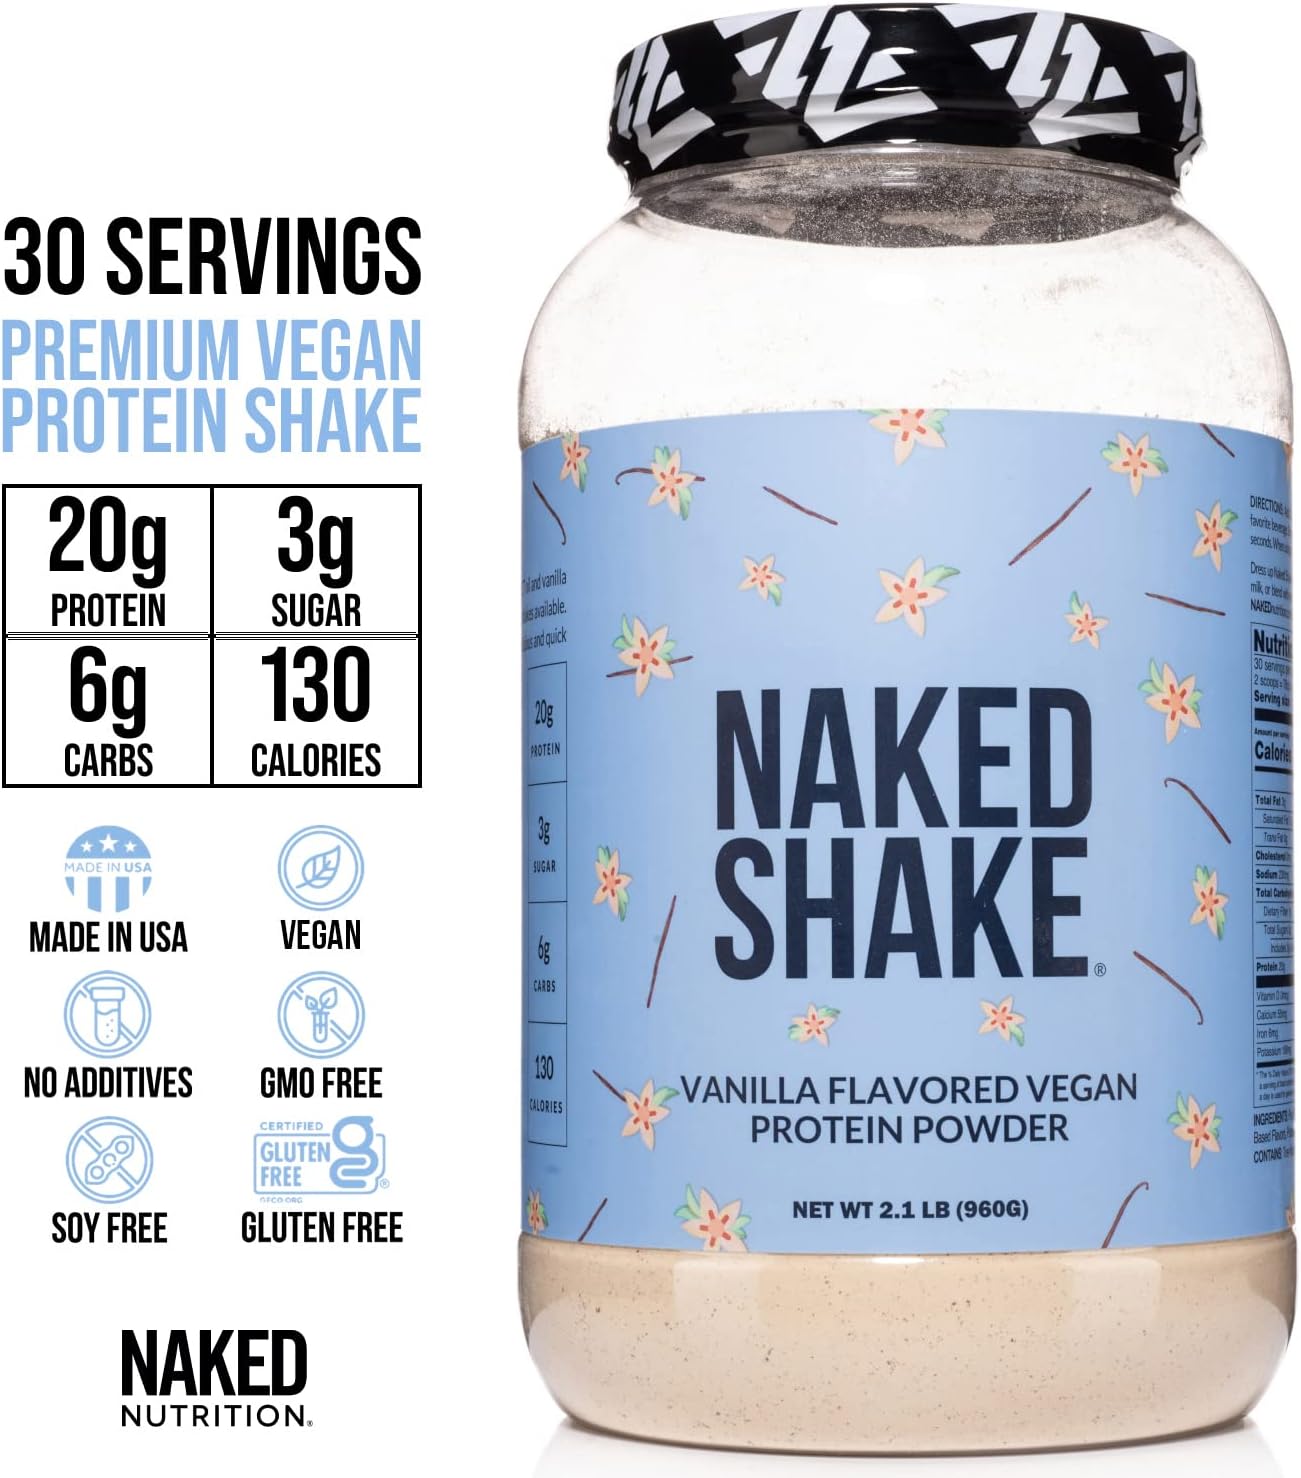 NAKED nutrition Naked Shake - Vanilla Protein Powder - Plant Based Protein Shake With Mct Oil, Gluten-Free, Soy-Free, No Gmos Or Artificial Sweeteners - 30 Servings : Health & Household